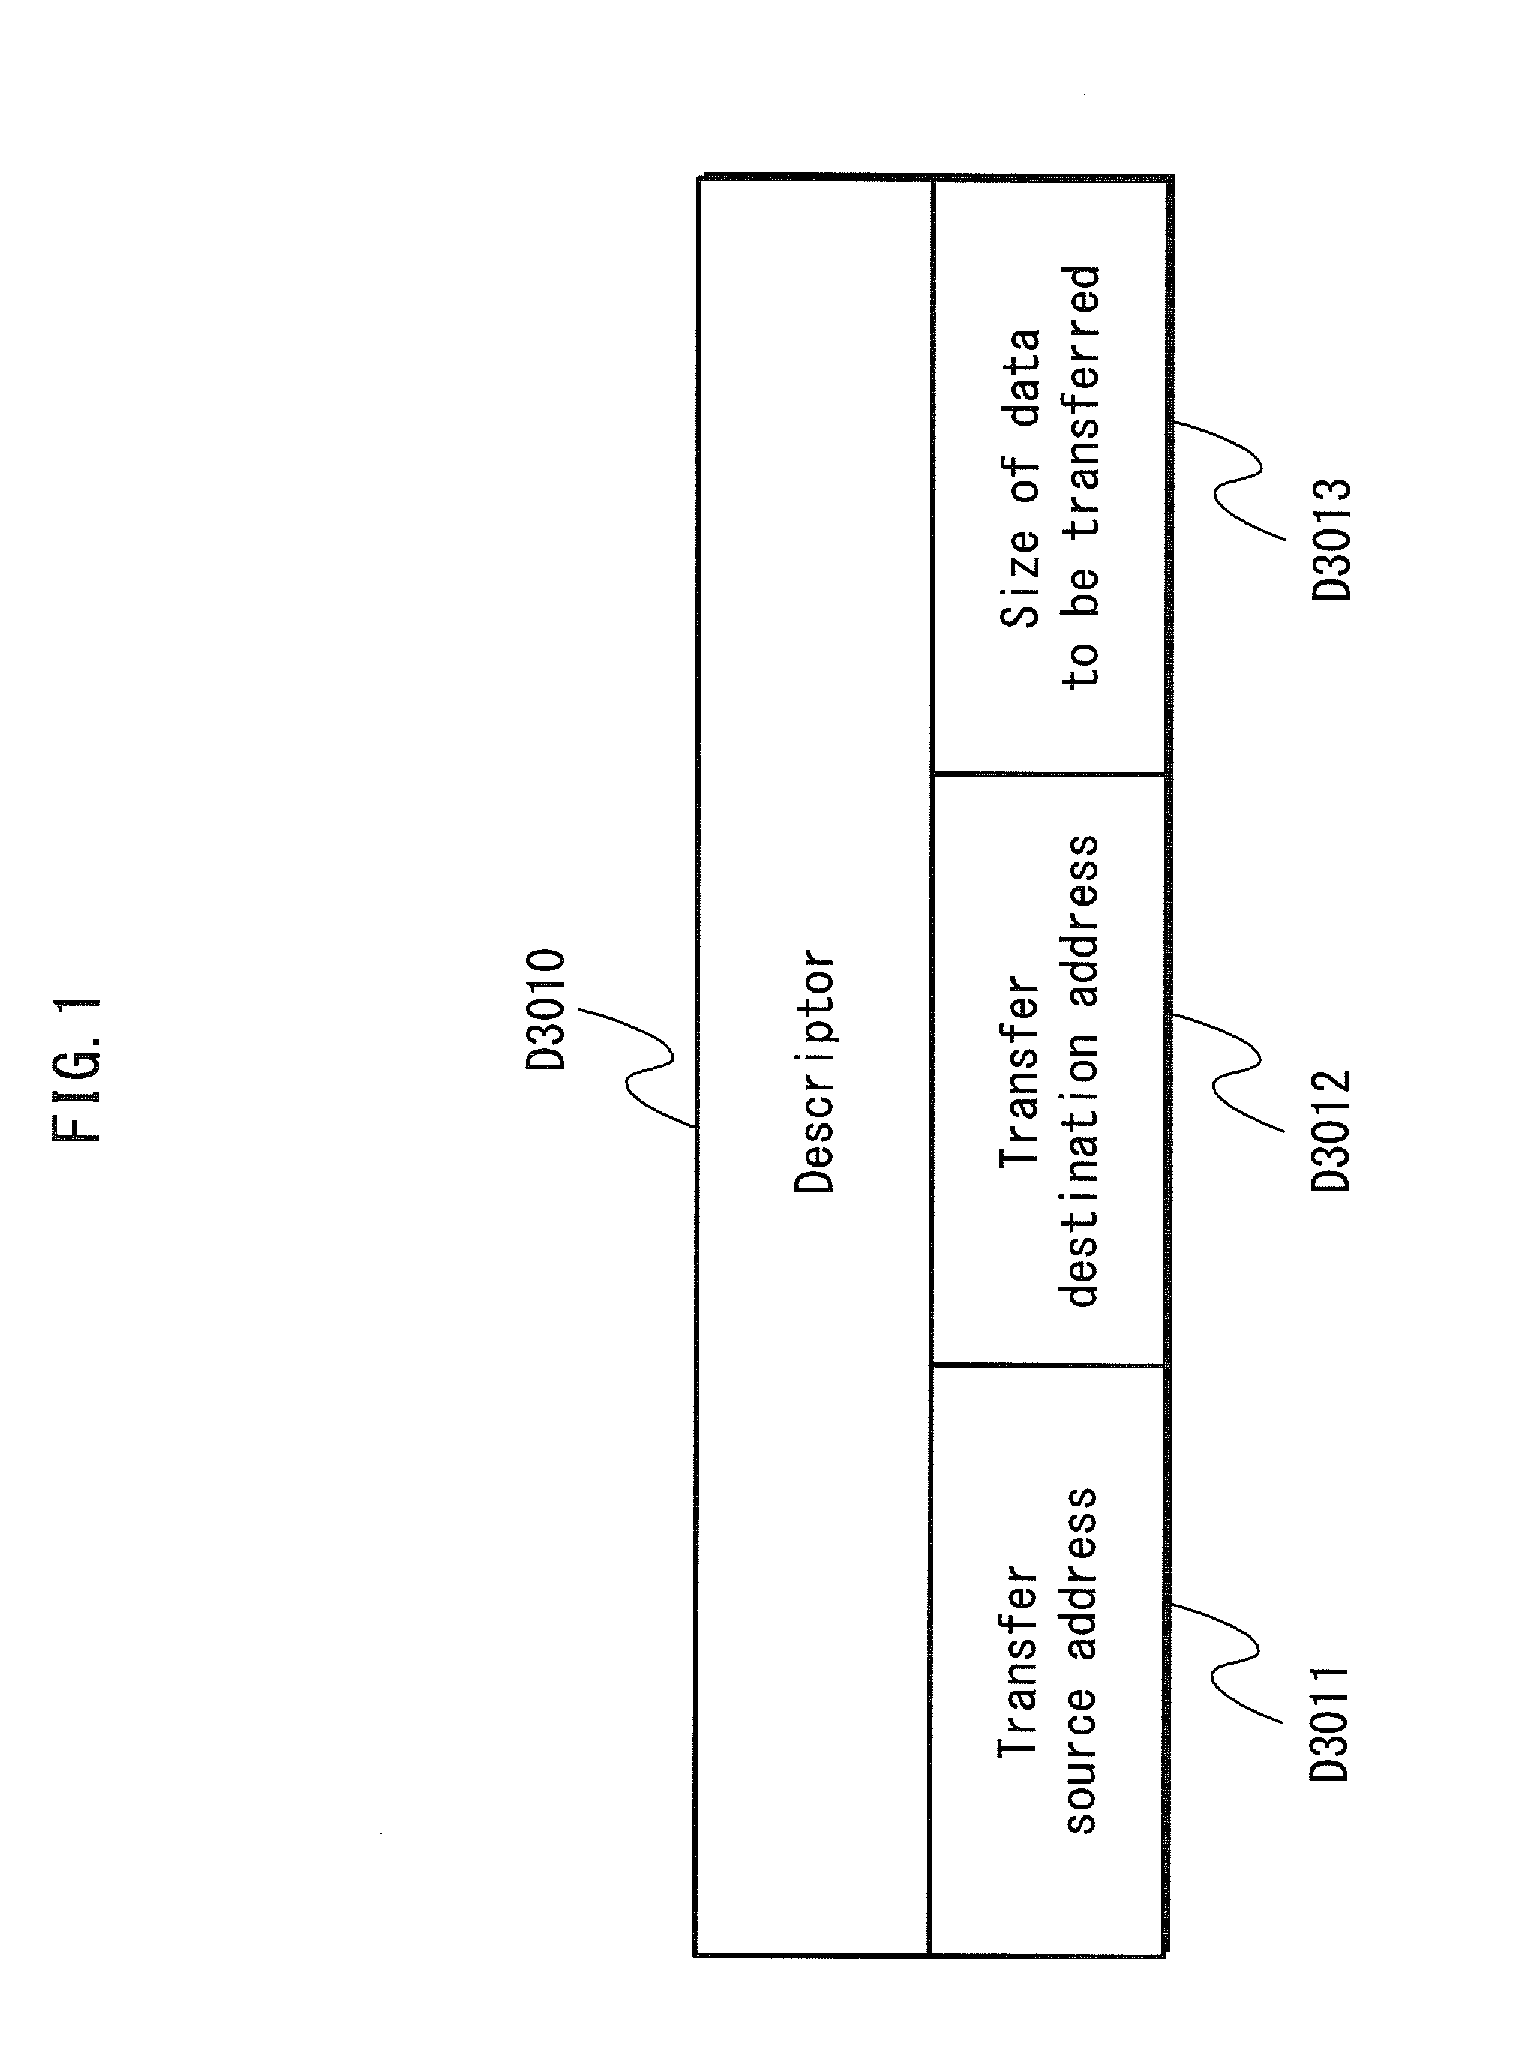 Data transfer control device, integrated circuit of same, data transfer control method of same, data transfer completion notification device, integrated circuit of same, data transfer completion notification method of same, and data transfer control system